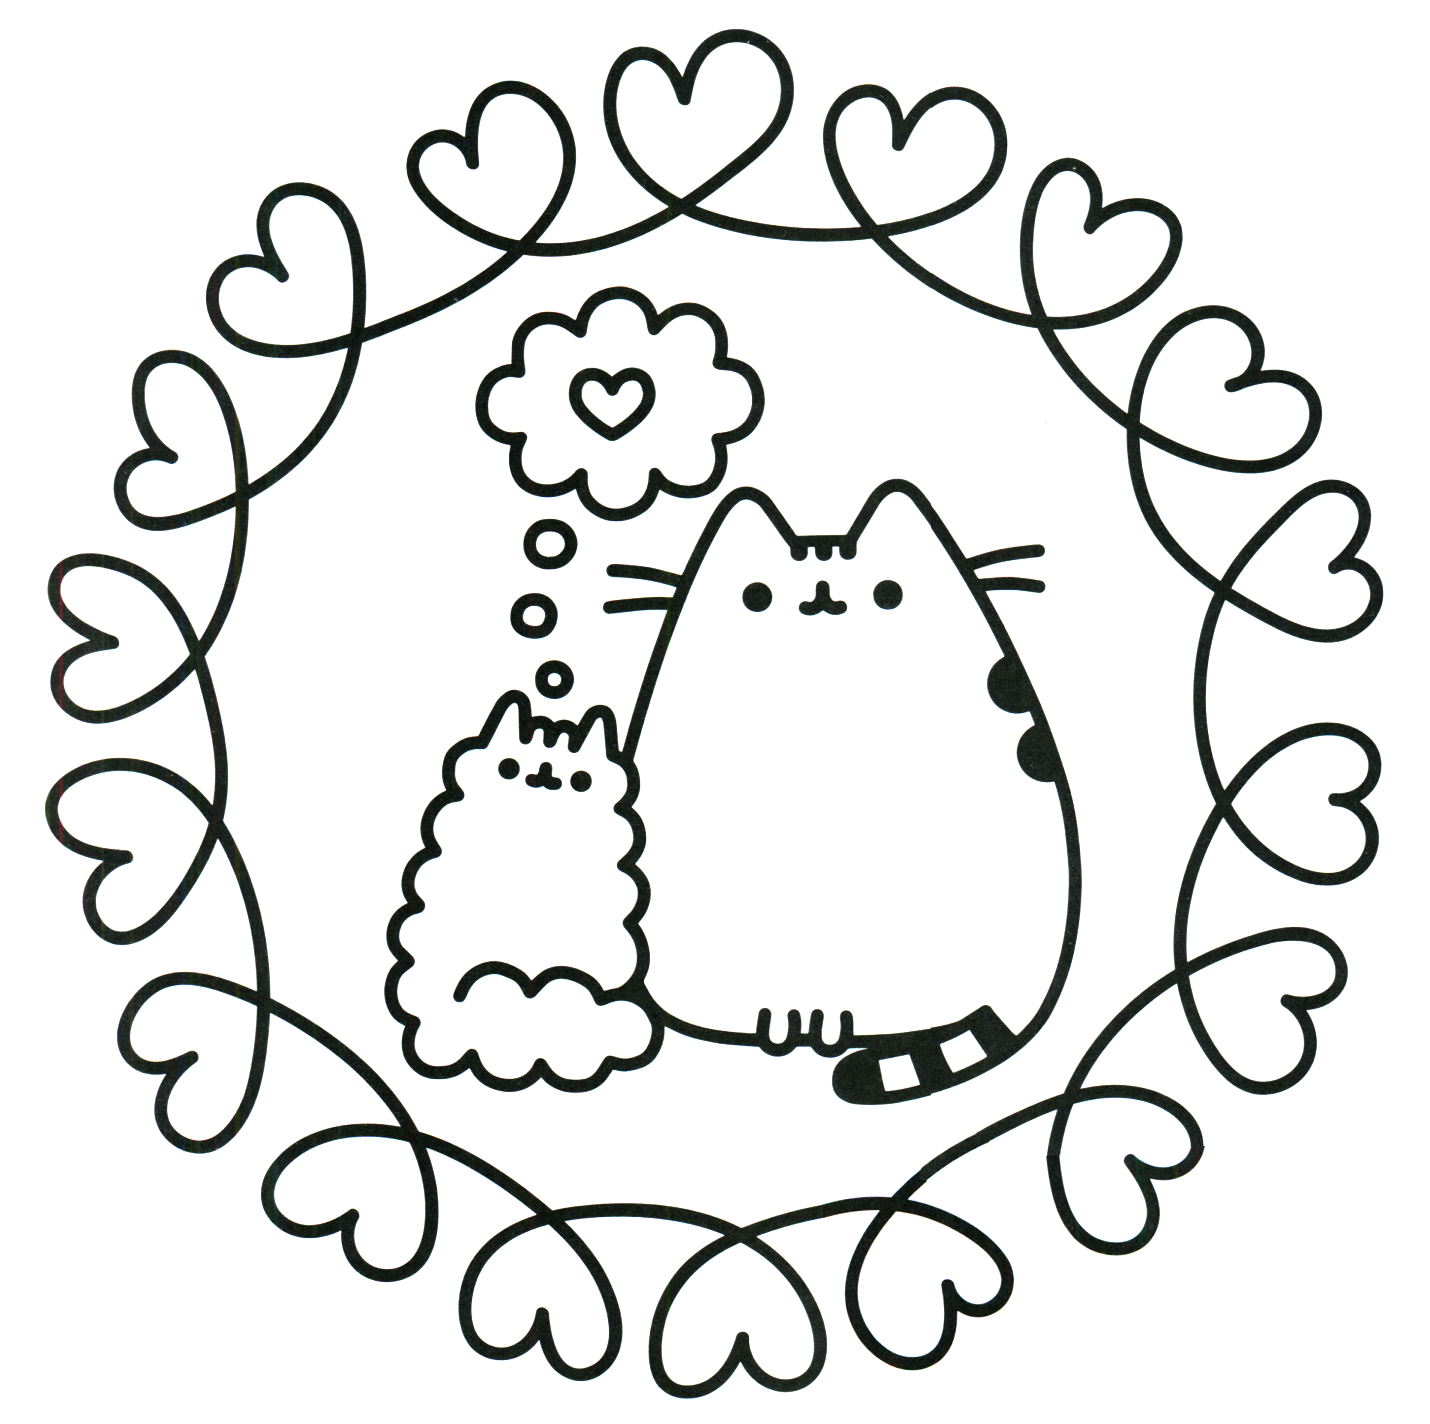 Pusheen Coloring Pages Best Coloring Pages For Kids Unicorn Coloring Pages Love Color